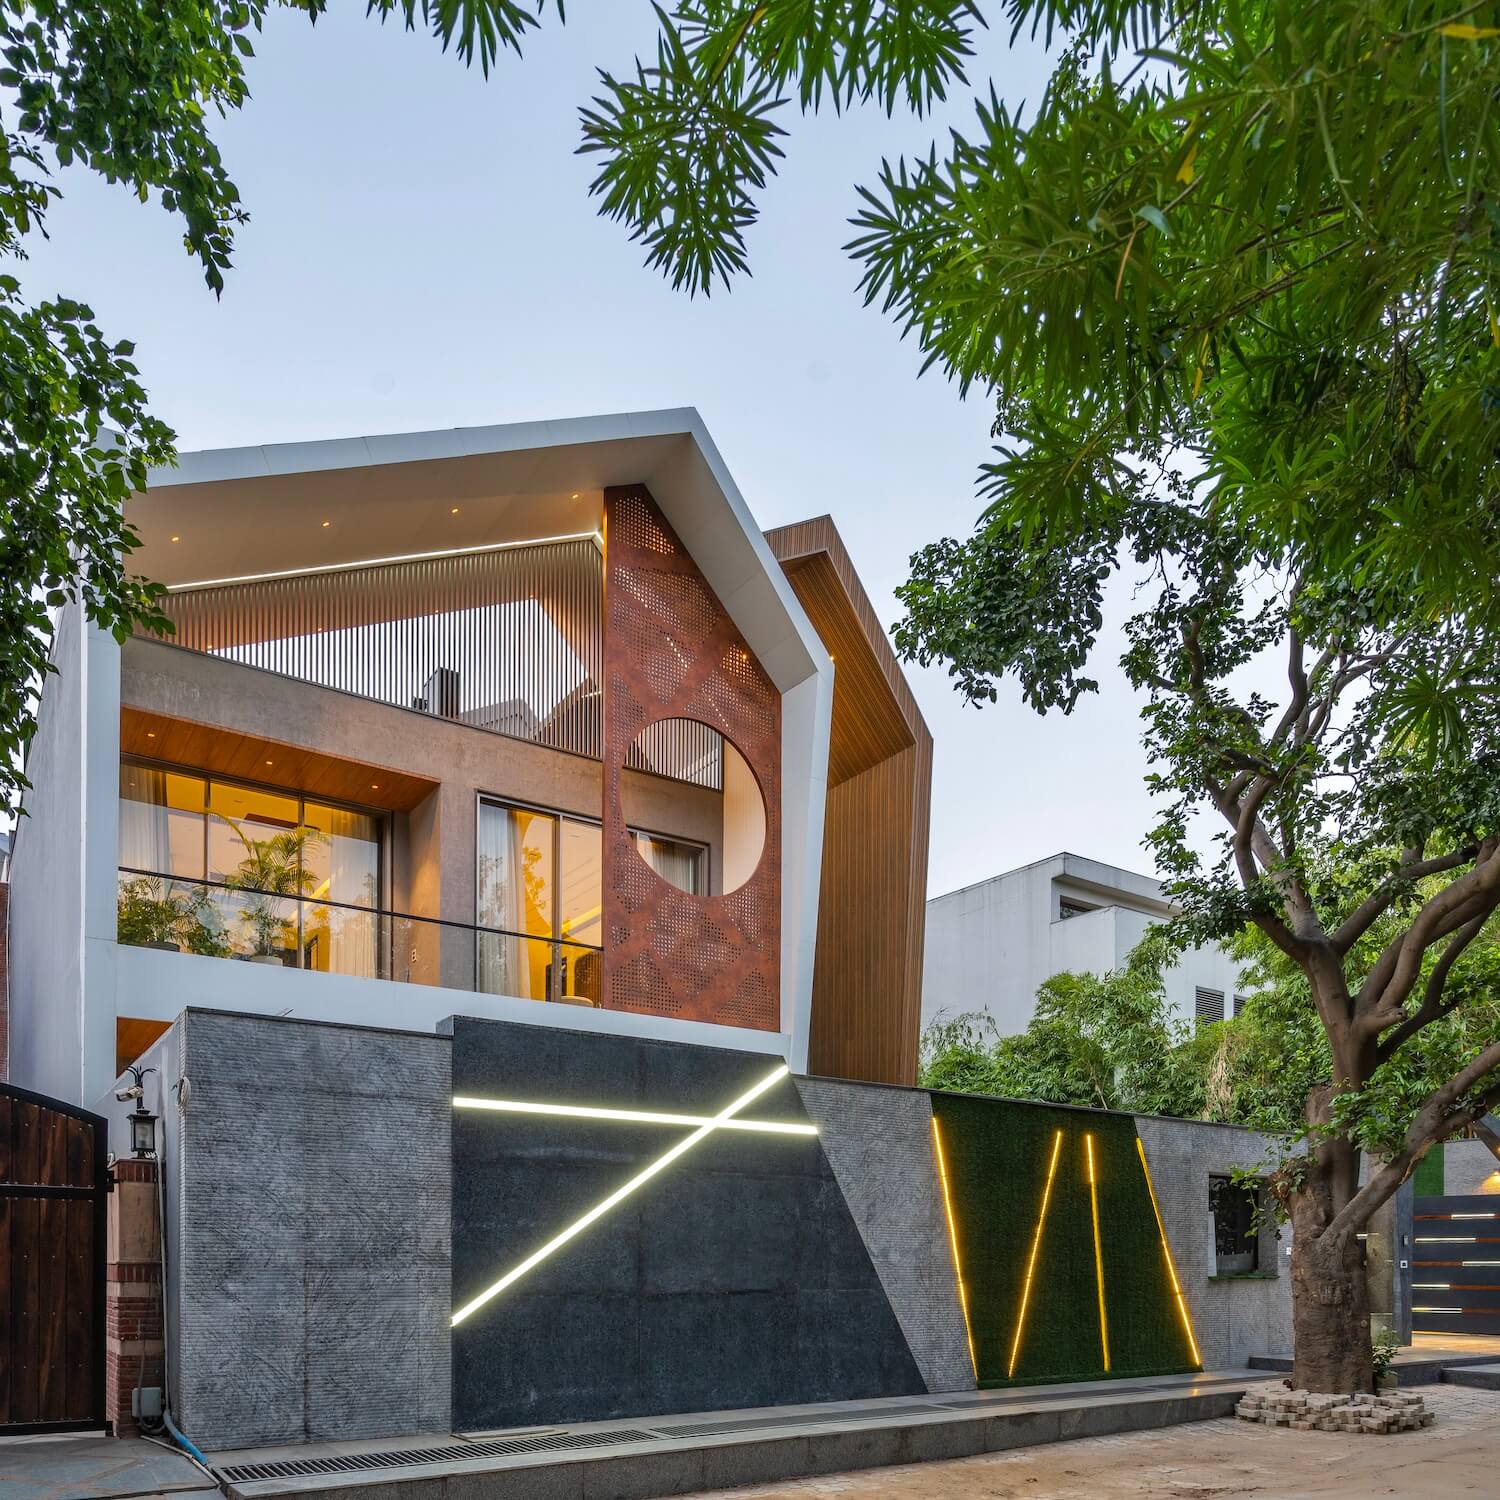 The Spruce House in Haryana, India by De|Houses